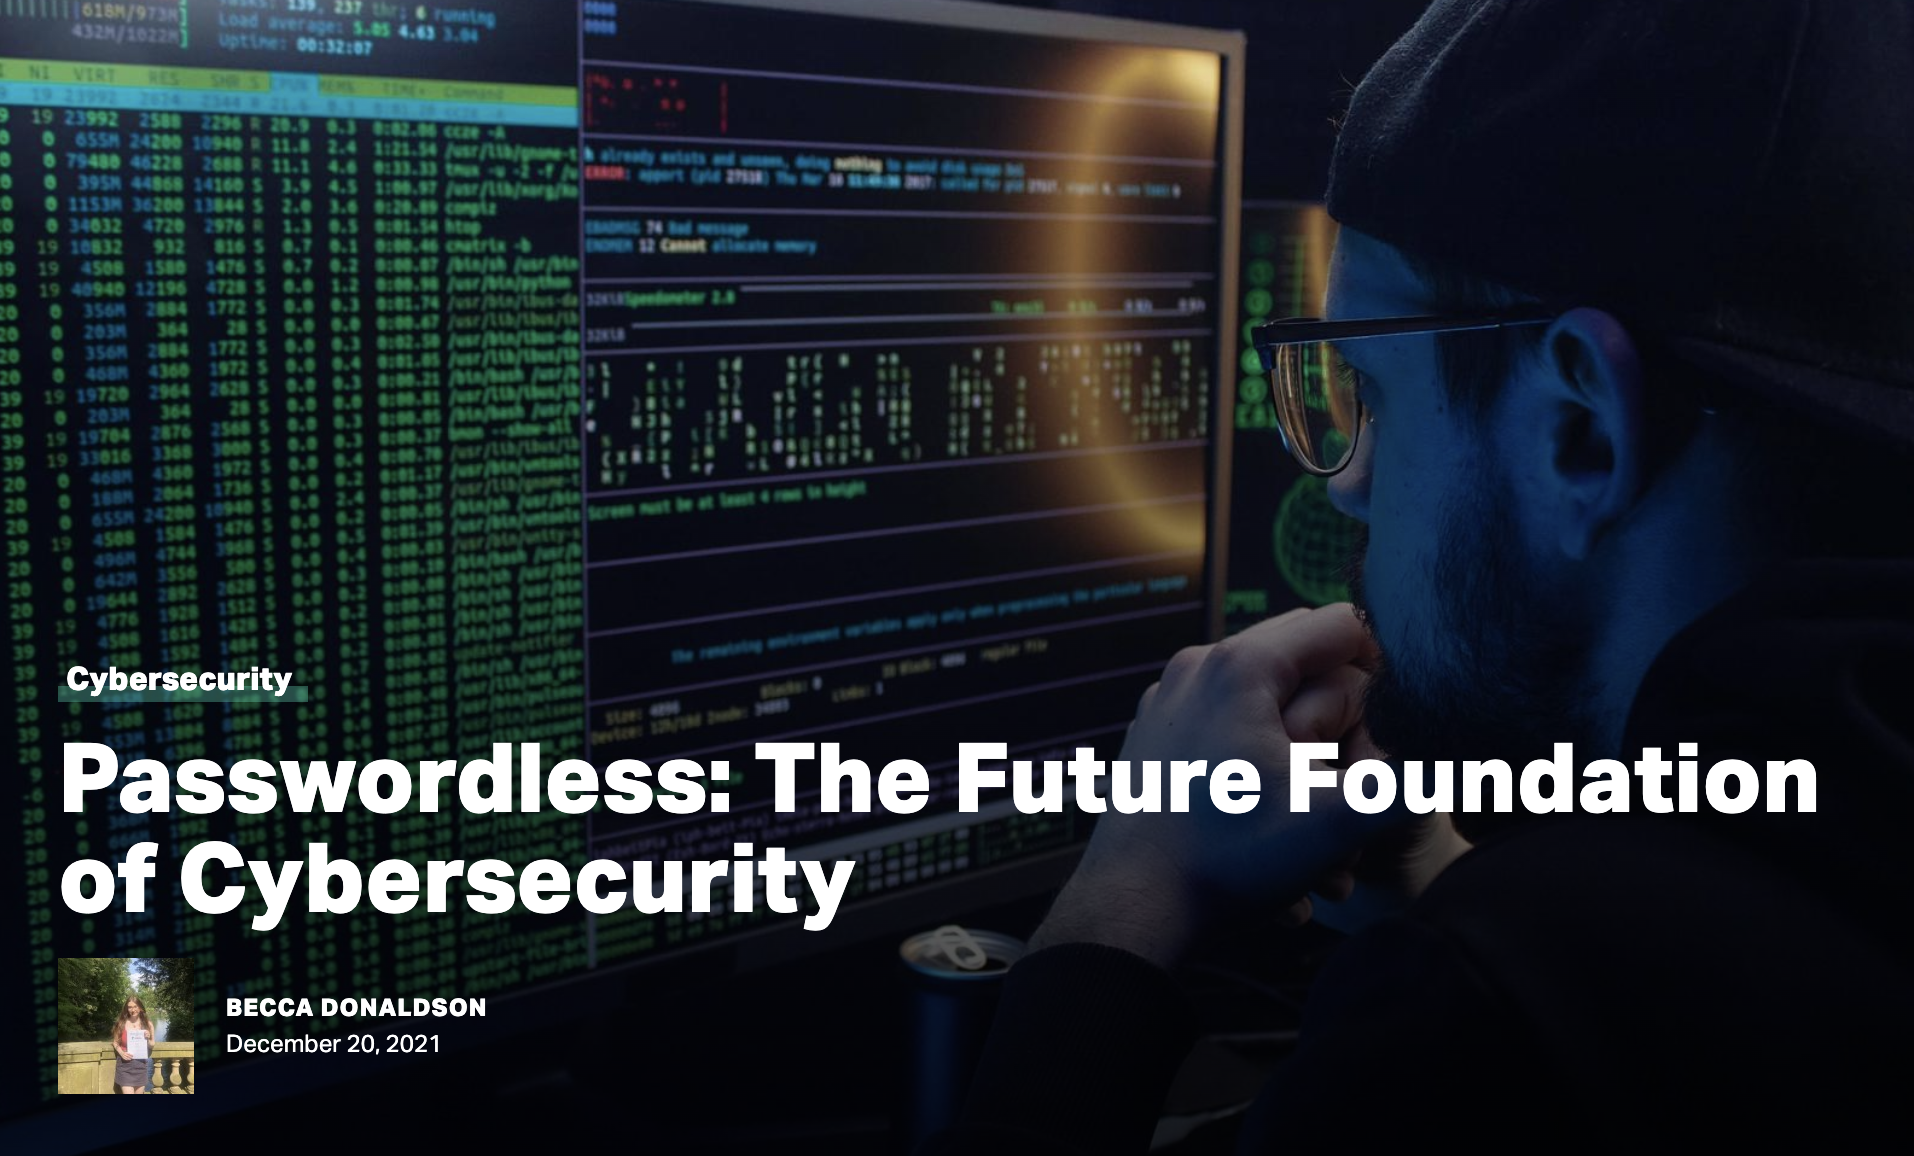 Passwordless: The Future Foundation of Cybersecurity